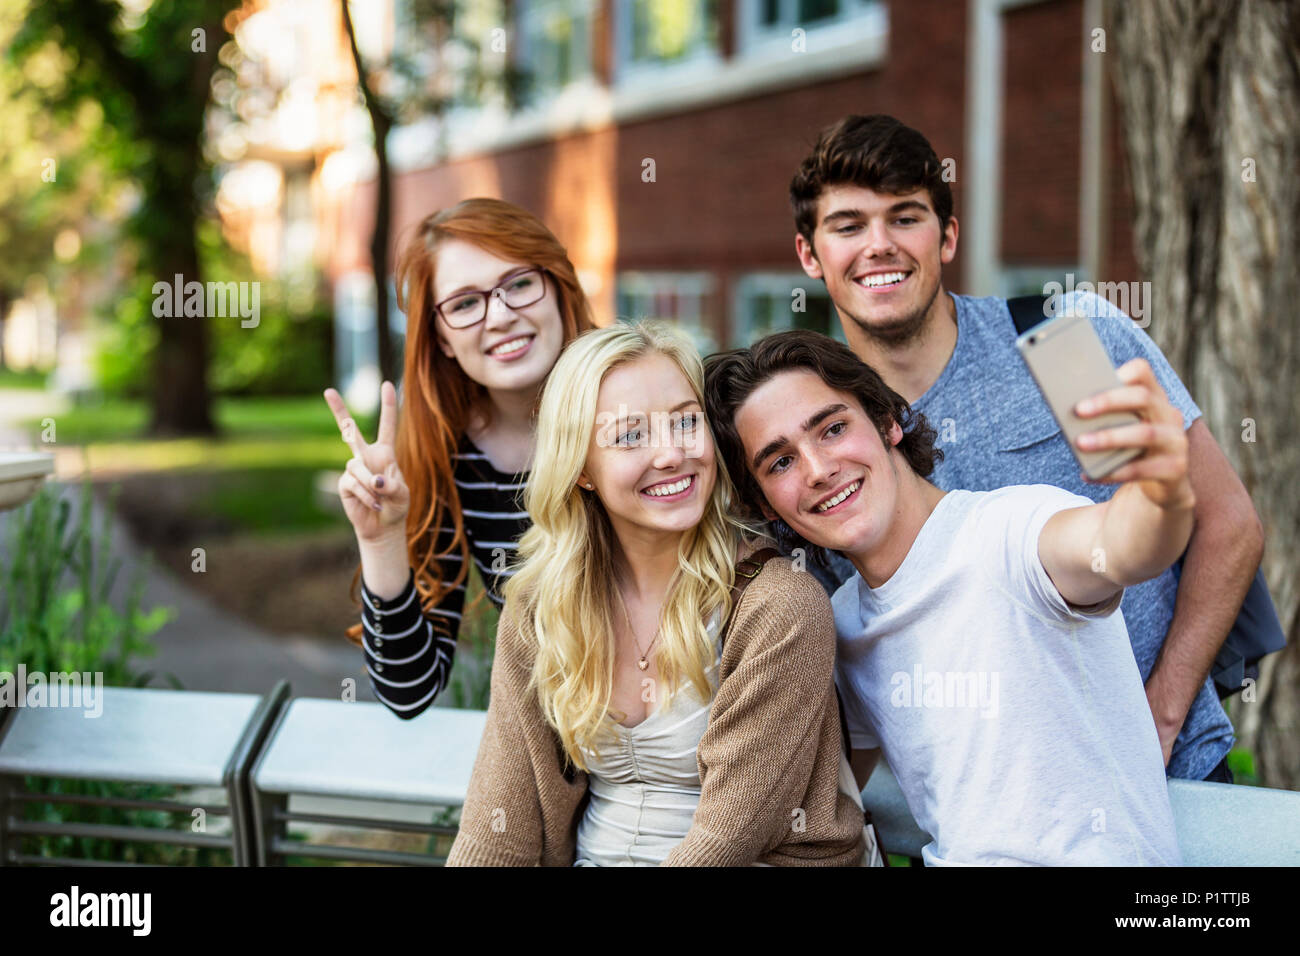 A group of four friends sitting on a bench taking a self-portrait with a smart phone on a university campus; Edmonton, Alberta, Canada Stock Photo